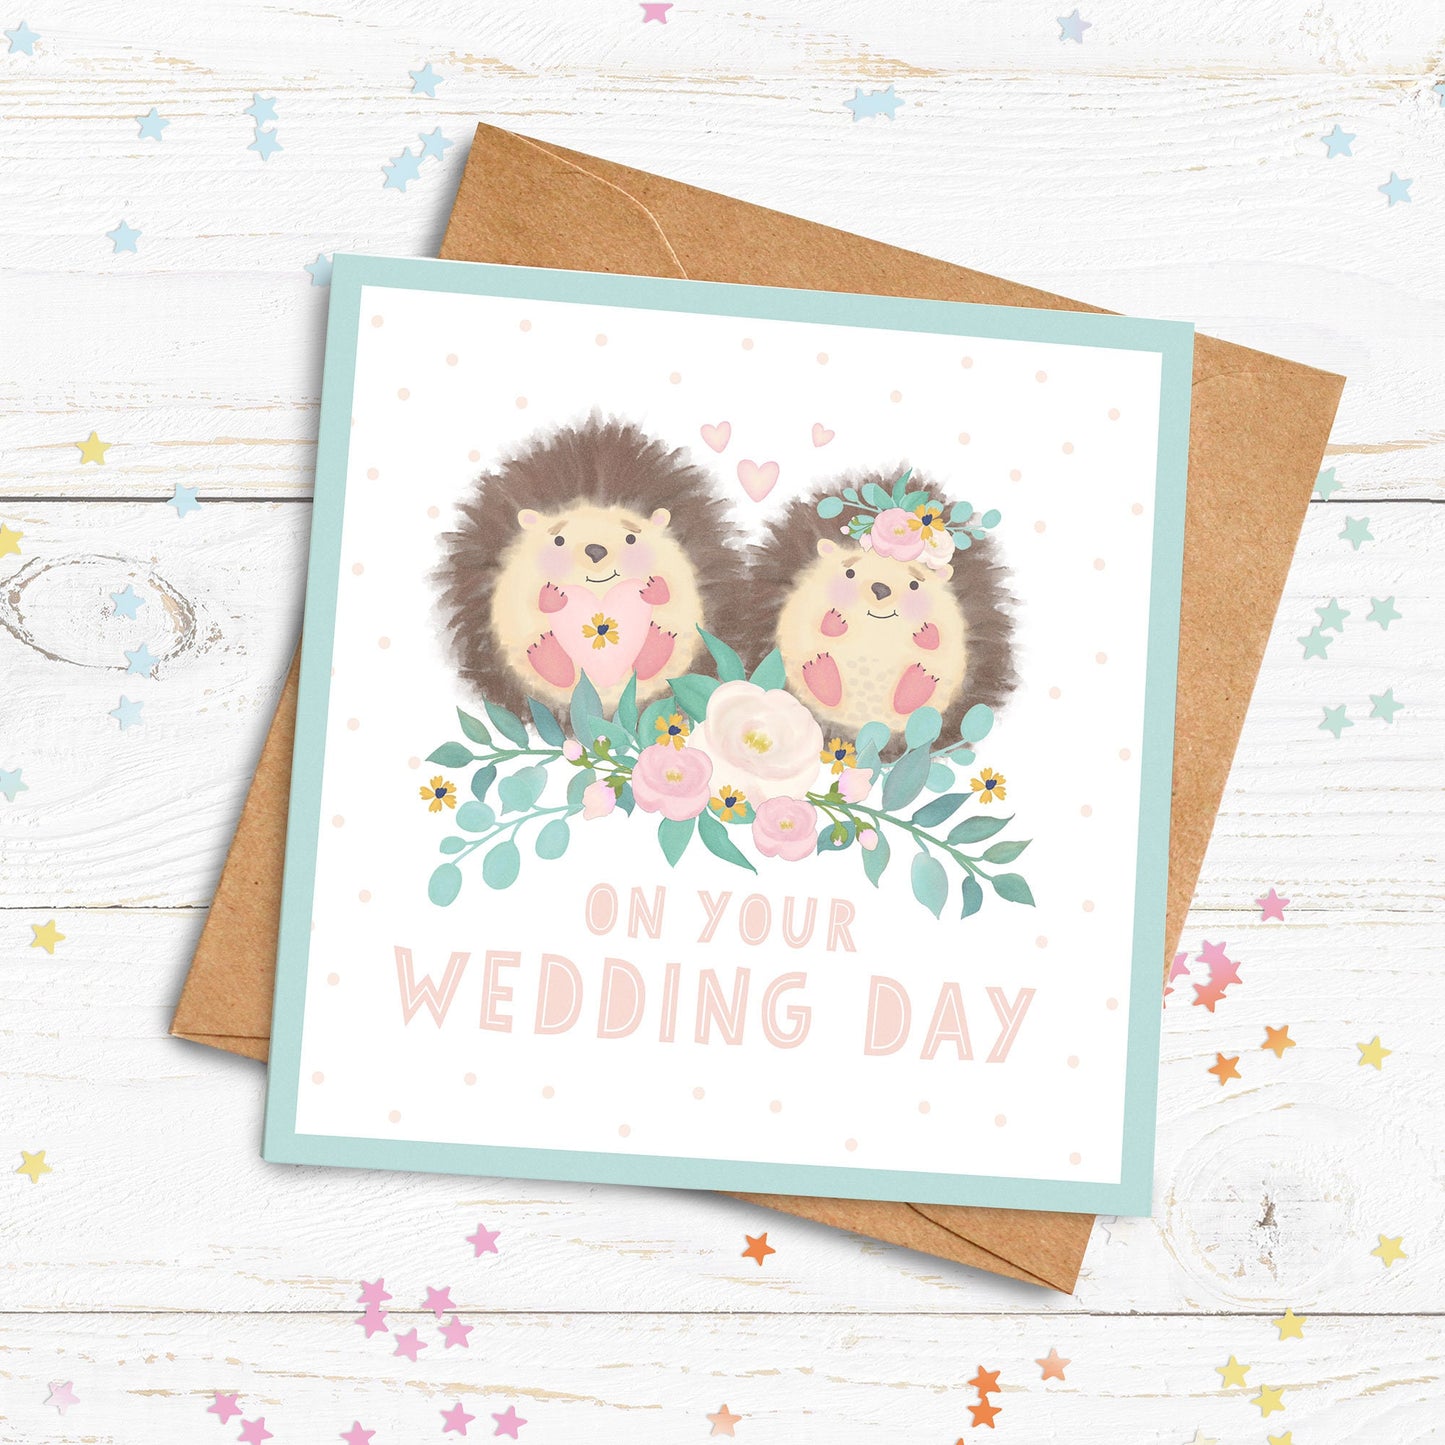 Hedgehog Wedding Day Personalised Card. Wedding Card. Congratulations on your wedding personalised card. Send Direct Option.